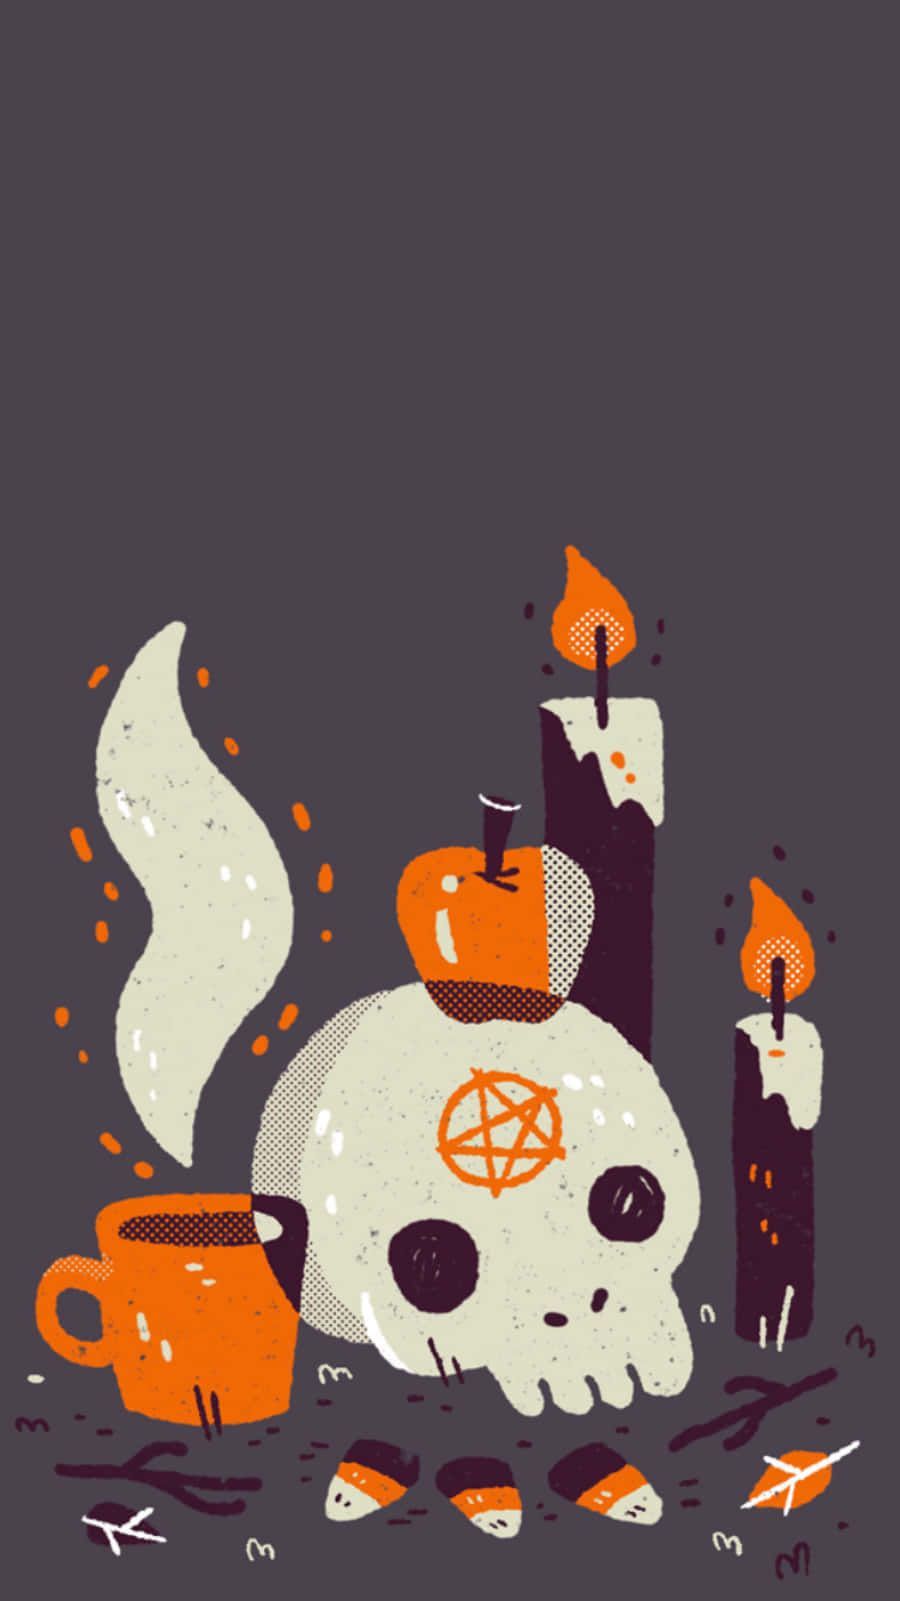 Download Celebrating Halloween With A Spooky Tumblr Aesthetic Wallpaper